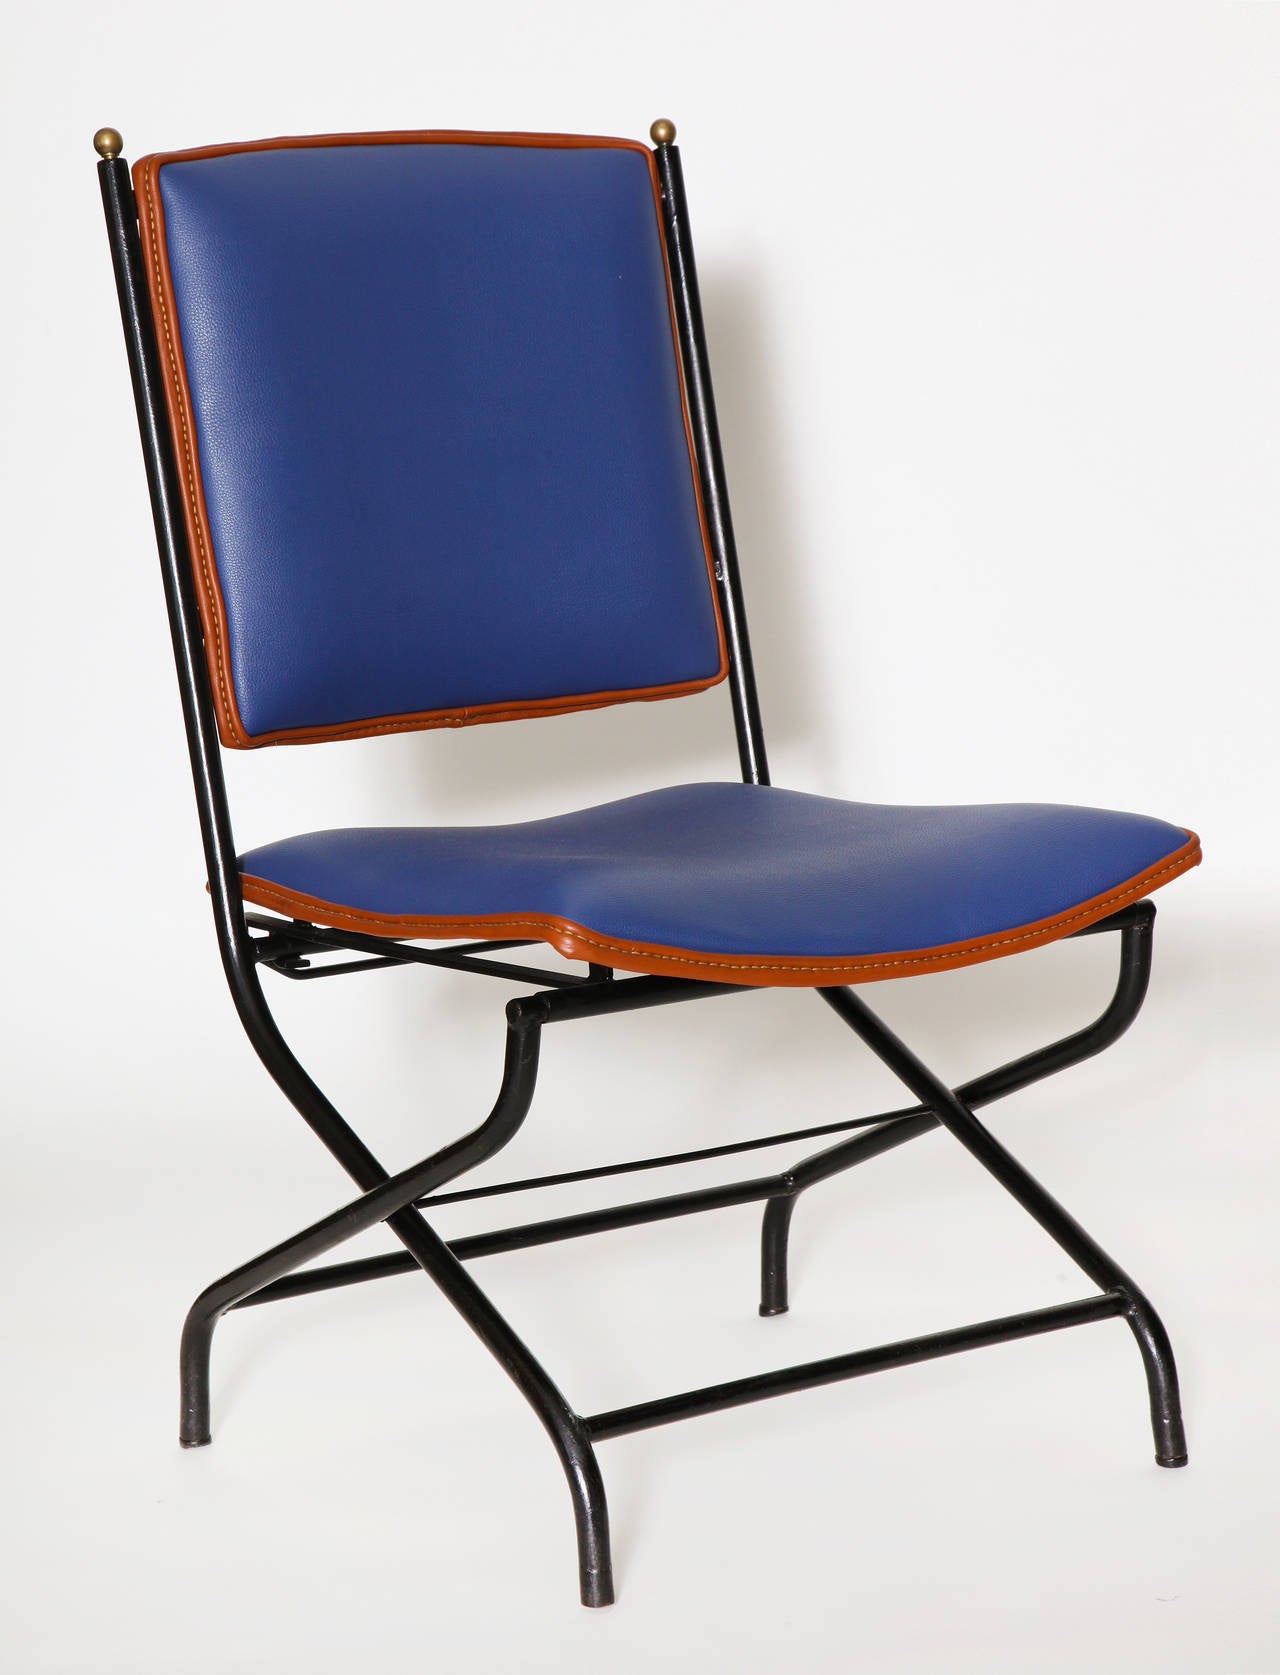 Pair of adjustable height lounge chairs in leather, bronze and brass, by Jacques Adnet.